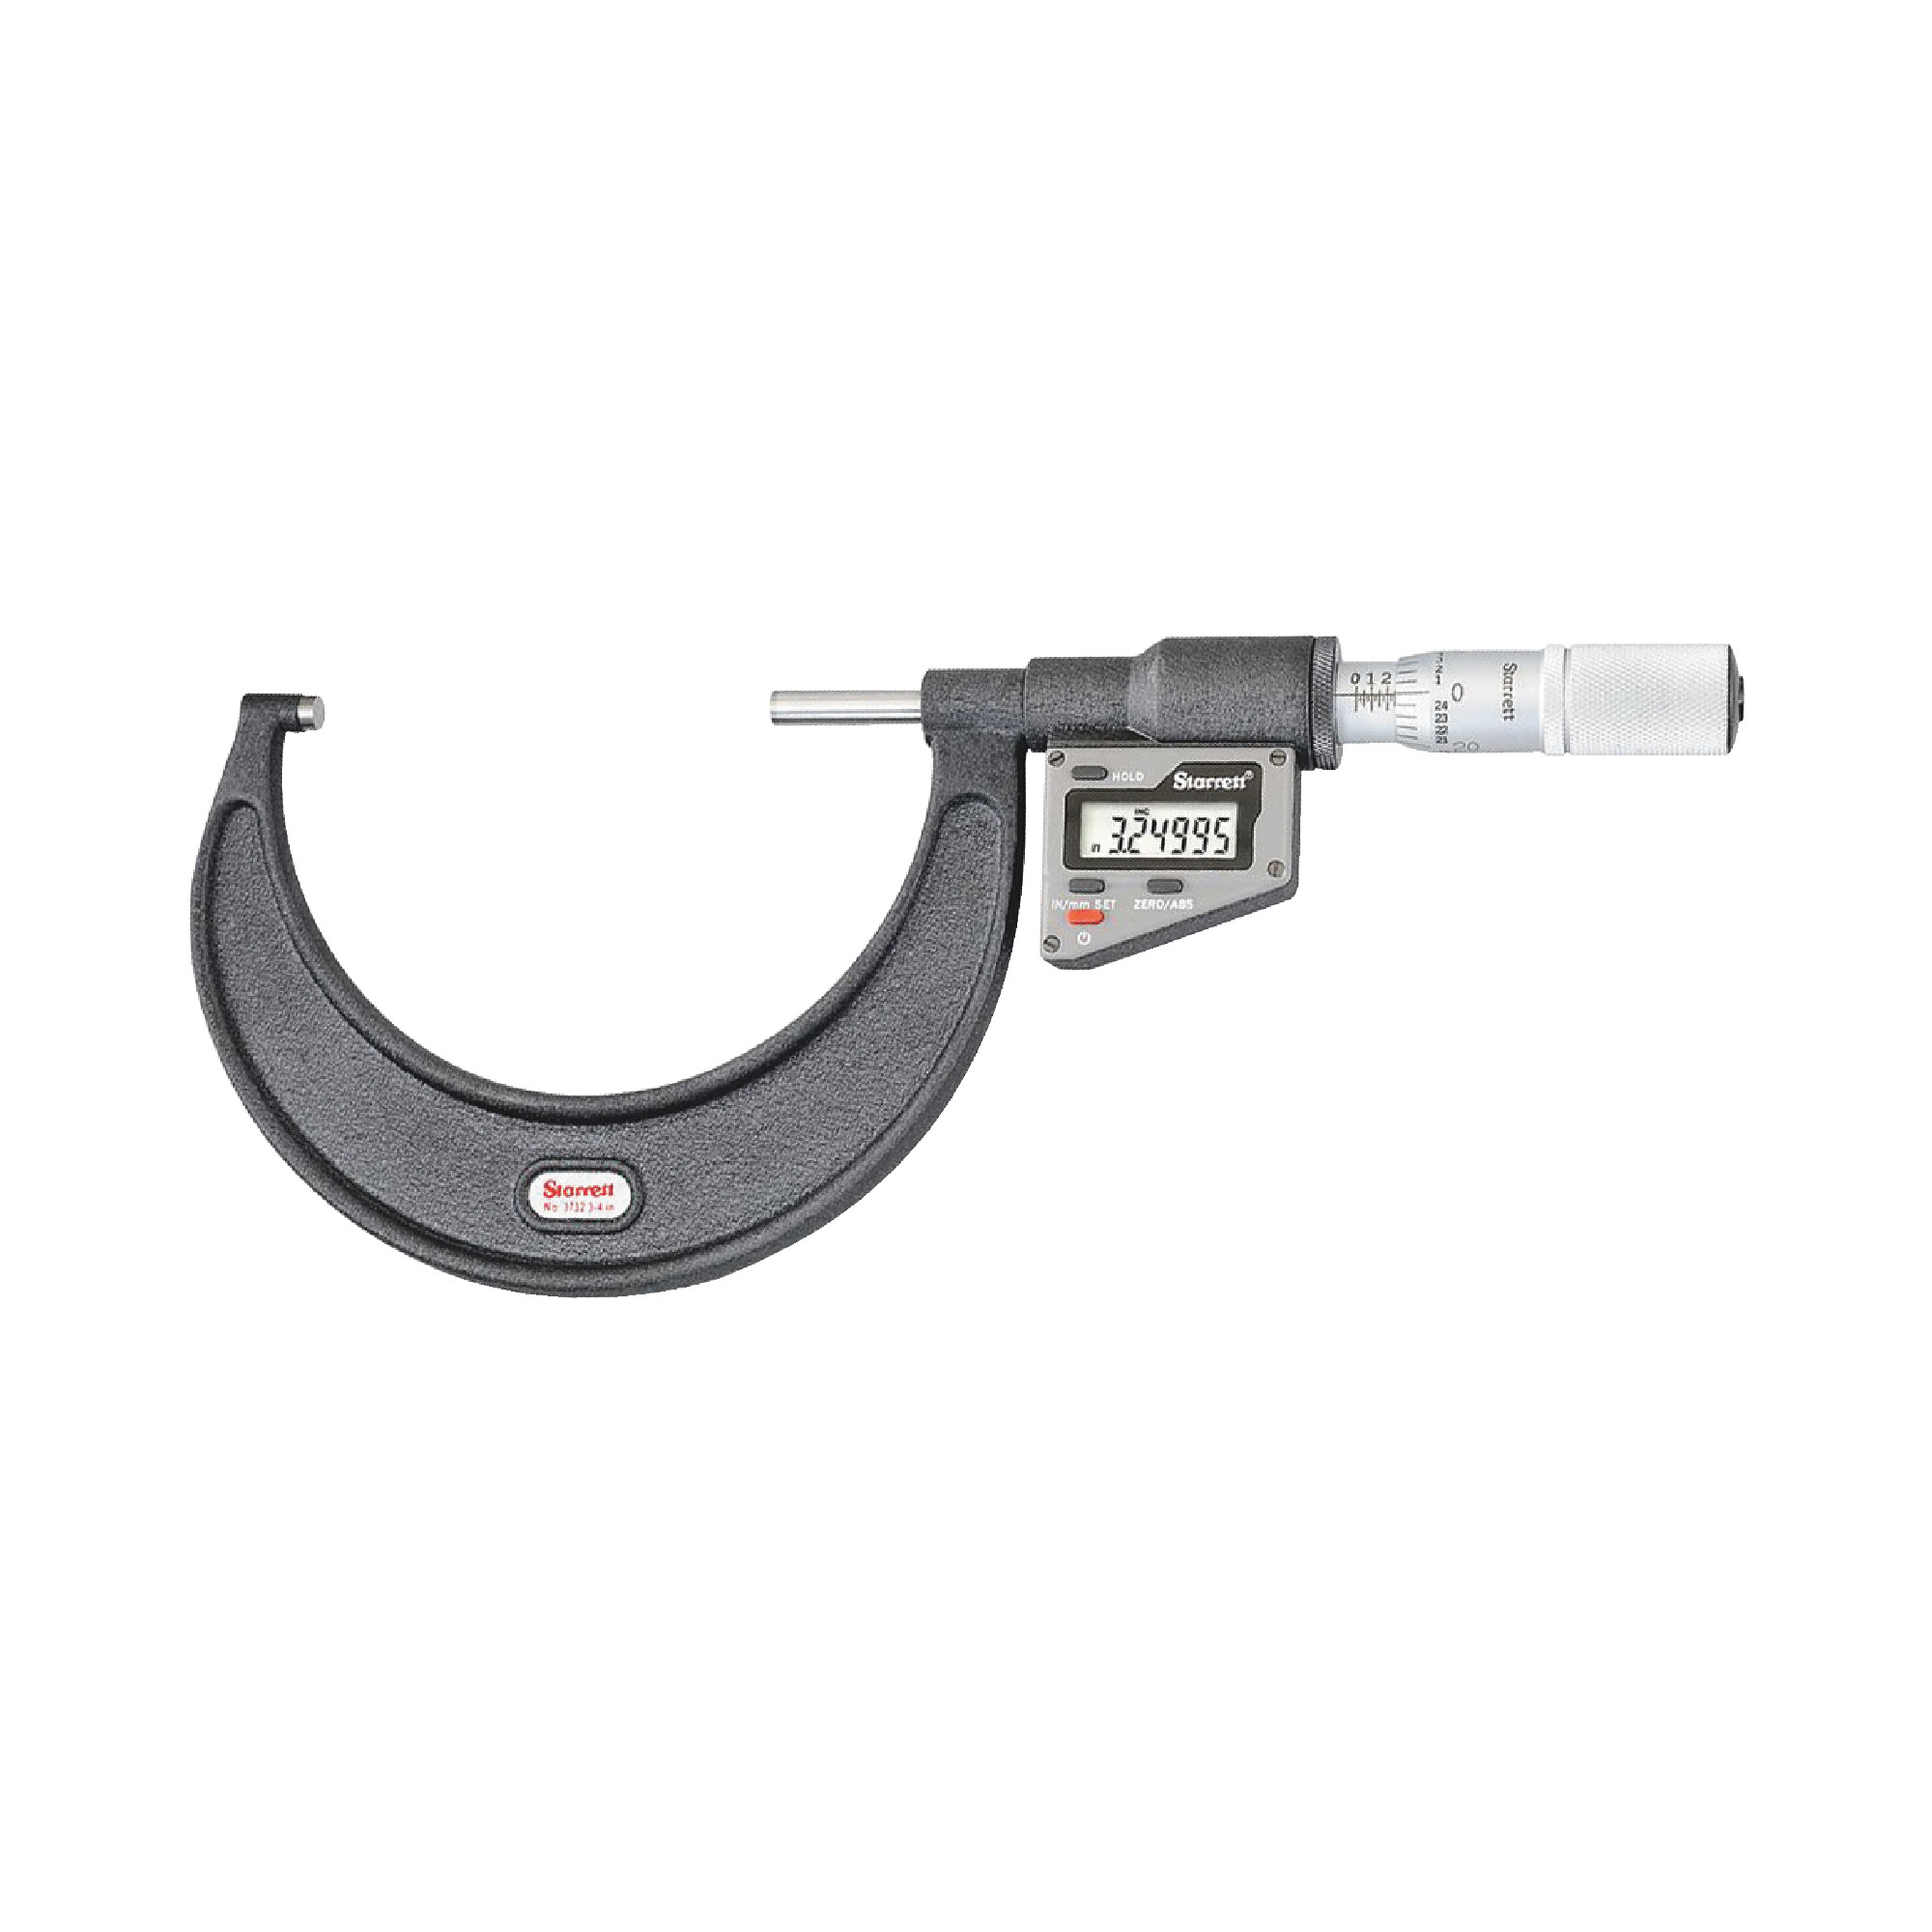 3732 Series Electronic Micrometer